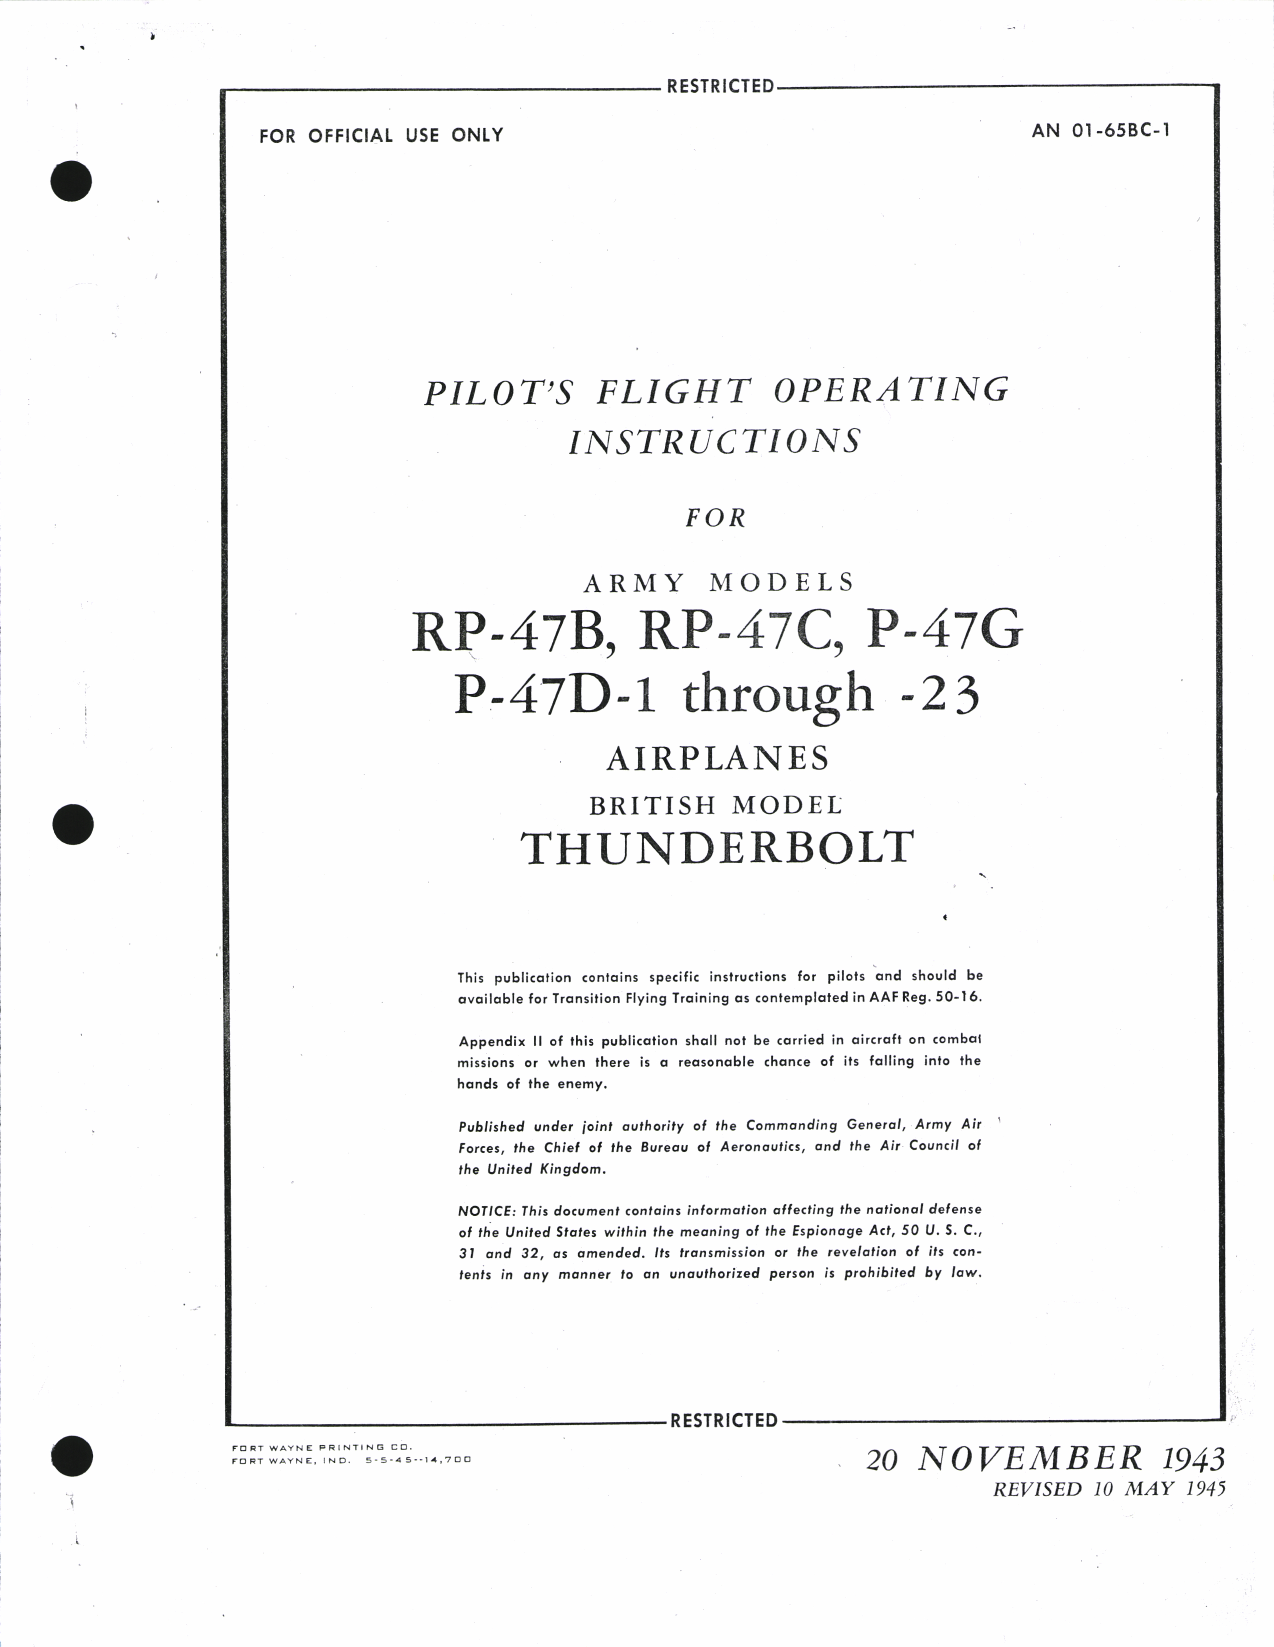 Sample page 1 from AirCorps Library document: Pilot's Flight Operating Instructions for RP-47B, RP-47C, P-47G, and P-47D